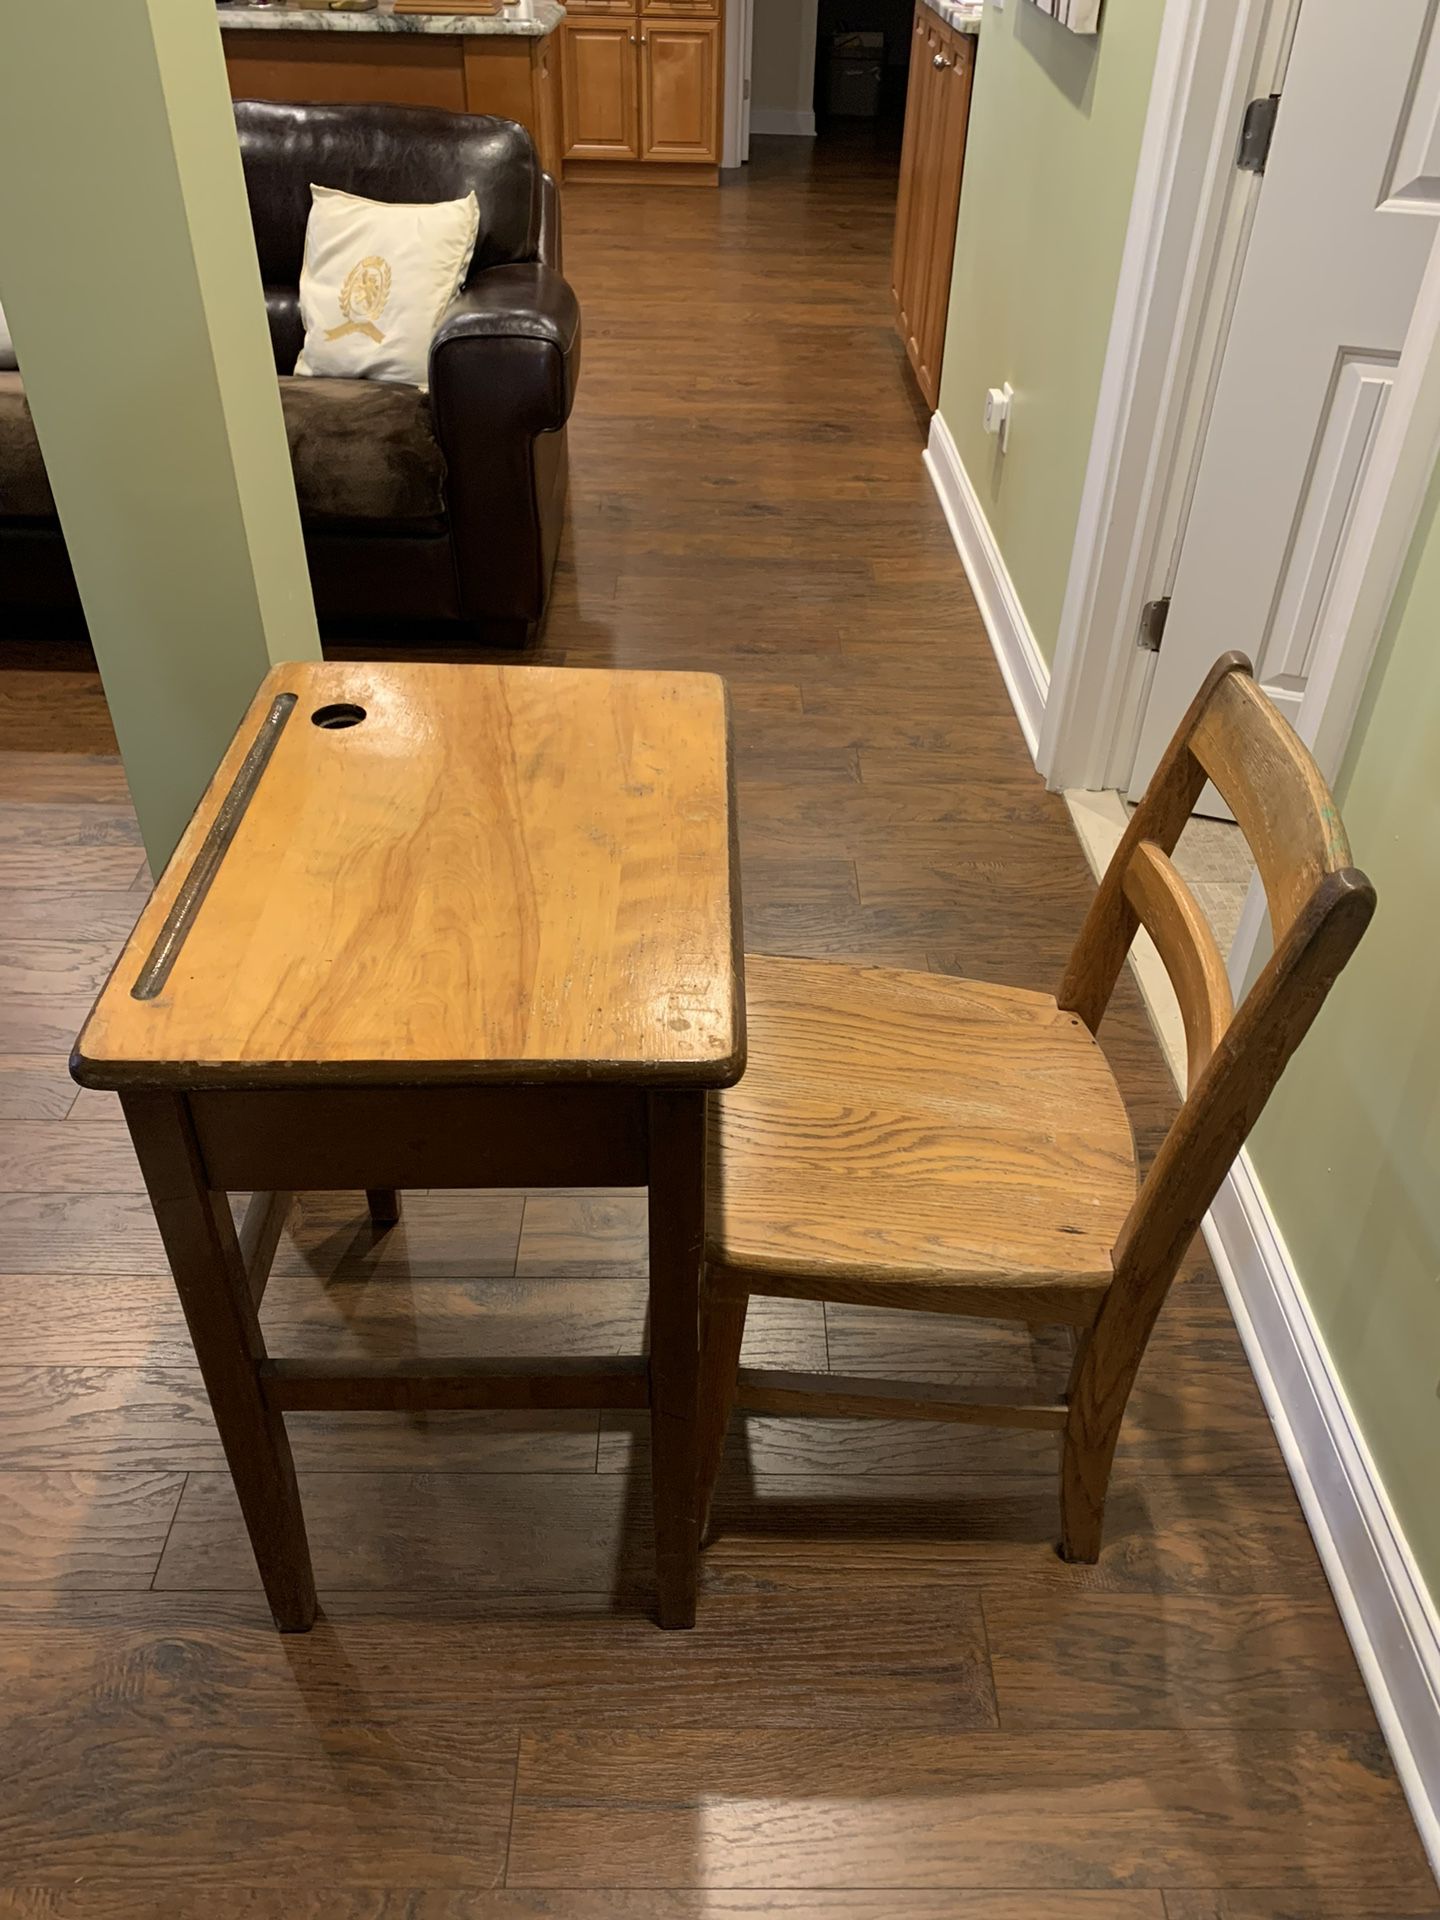 Vintage School Desk With Matching Chair